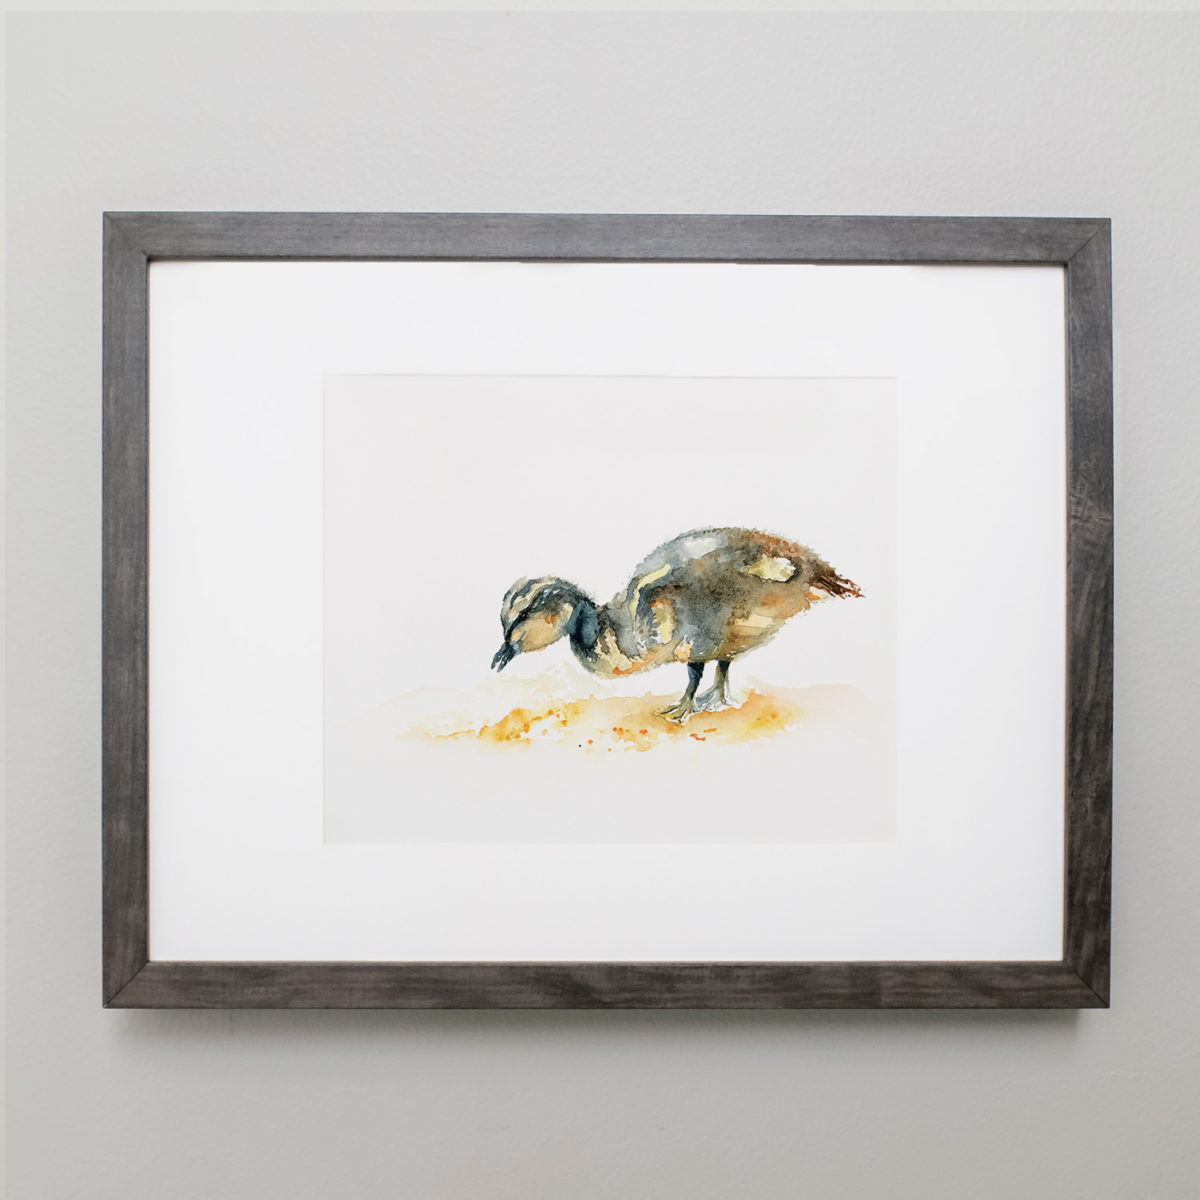 Watercolor of duckling in a gray frame